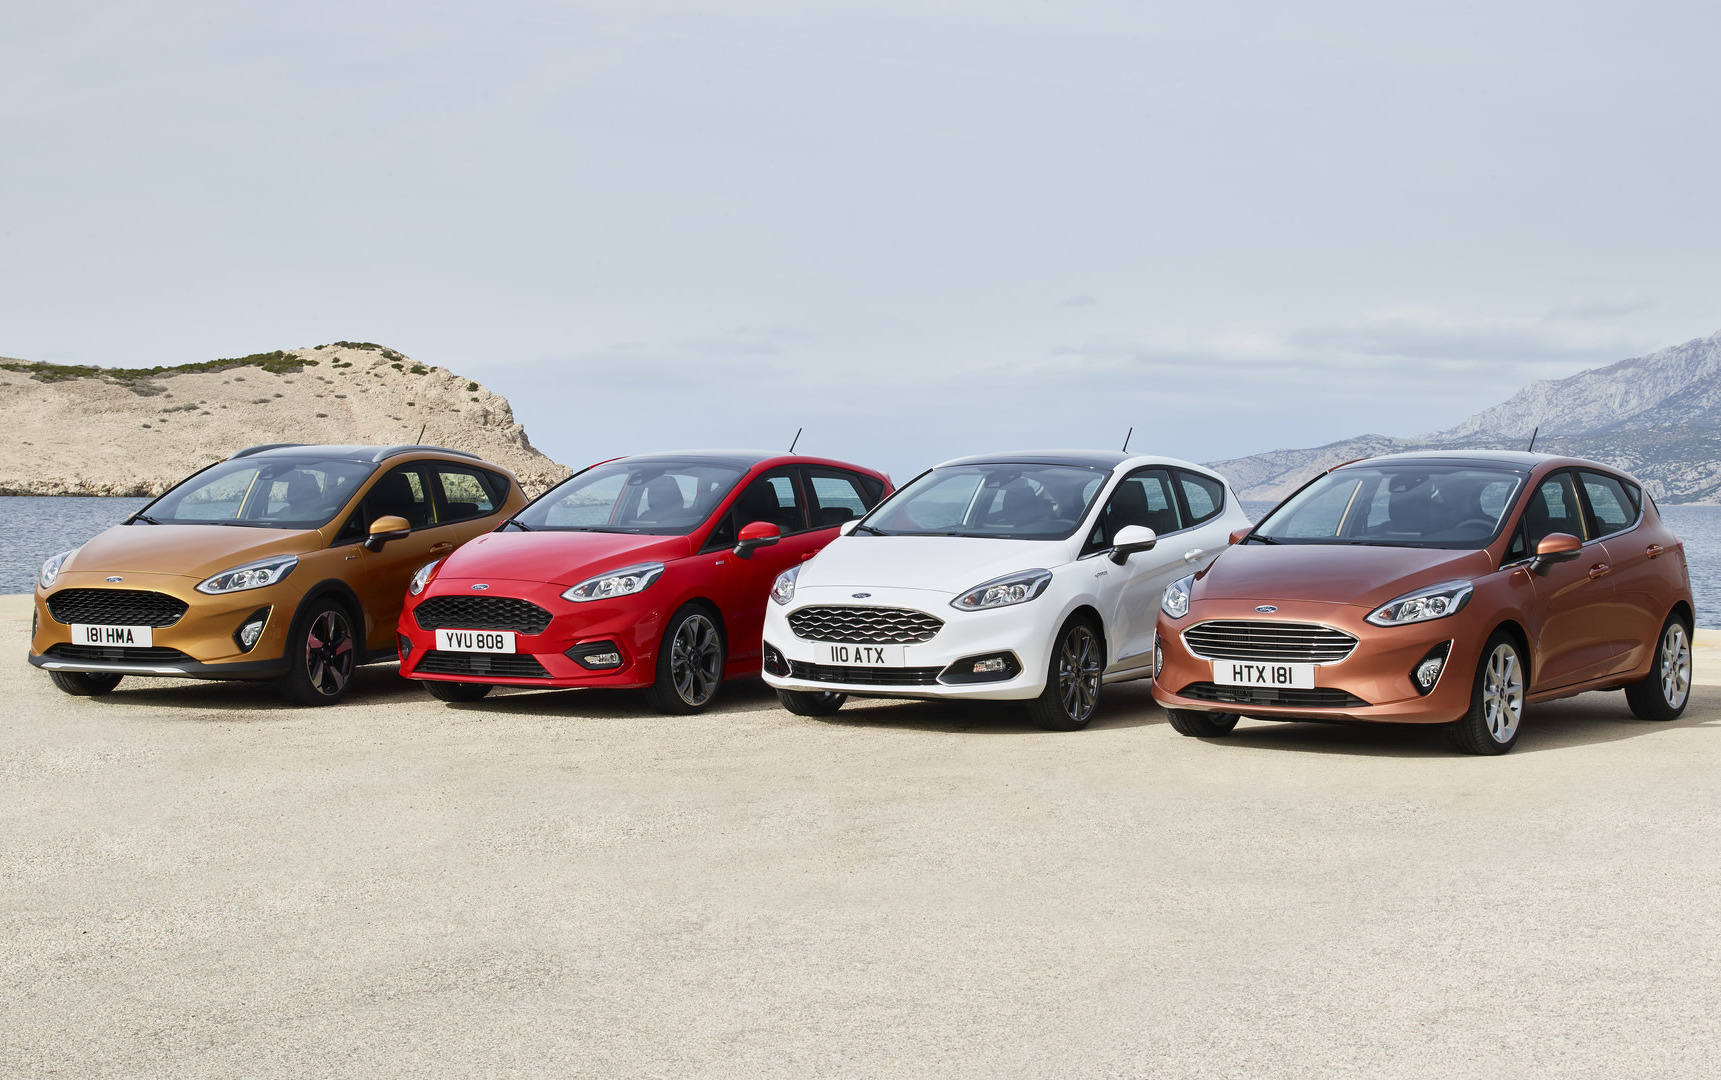 2017 Ford Fiesta revealed, ‘Fiesta Active’ crossover added to range